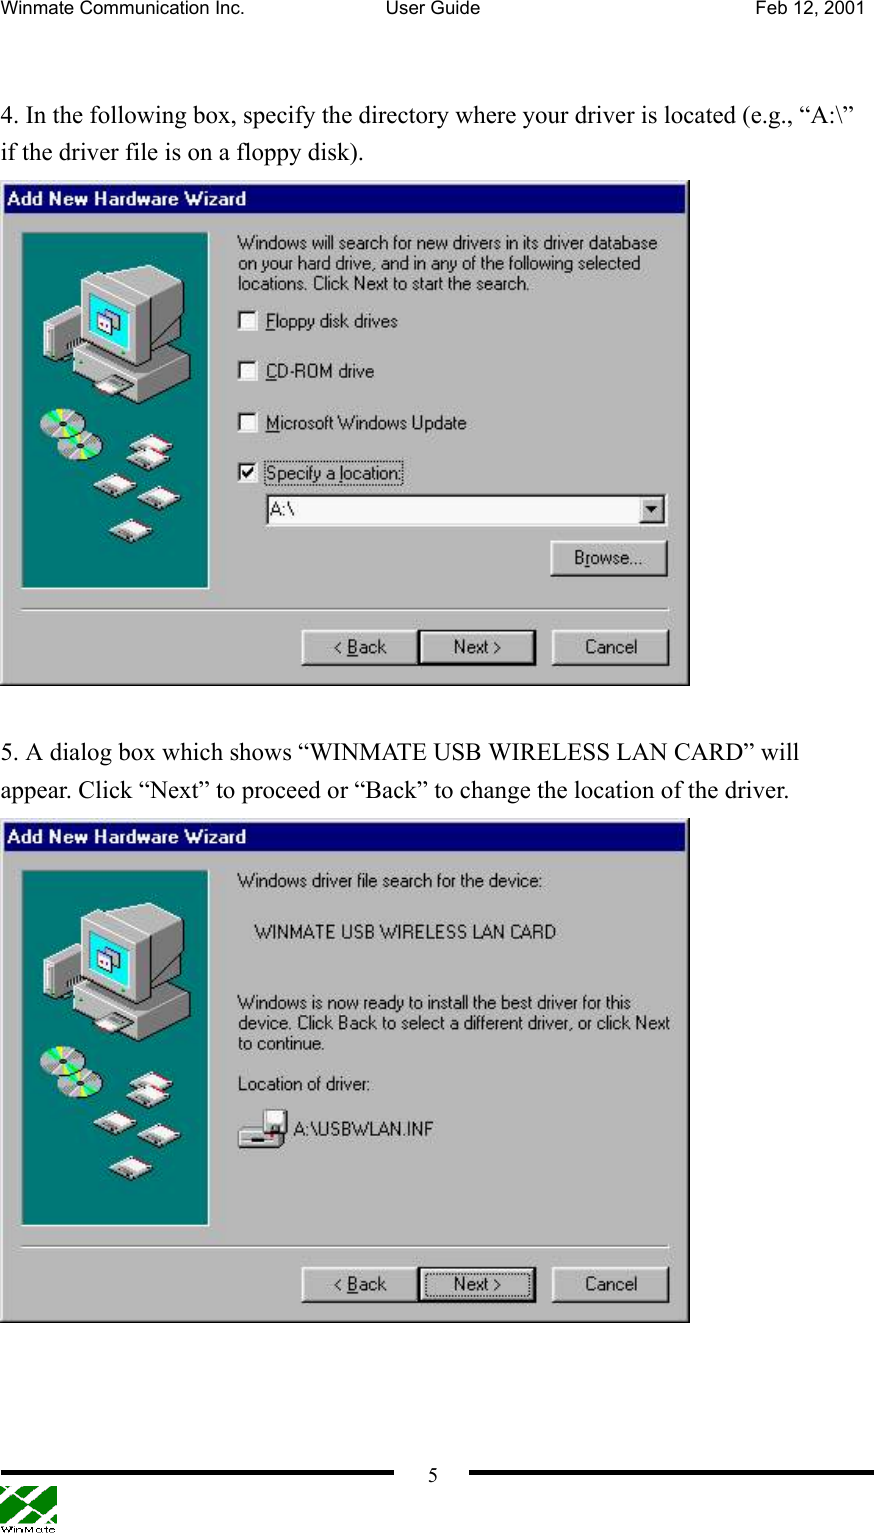 Winmate Communication Inc.  User Guide  Feb 12, 2001    5  4. In the following box, specify the directory where your driver is located (e.g., “A:\” if the driver file is on a floppy disk).   5. A dialog box which shows “WINMATE USB WIRELESS LAN CARD” will appear. Click “Next” to proceed or “Back” to change the location of the driver.    